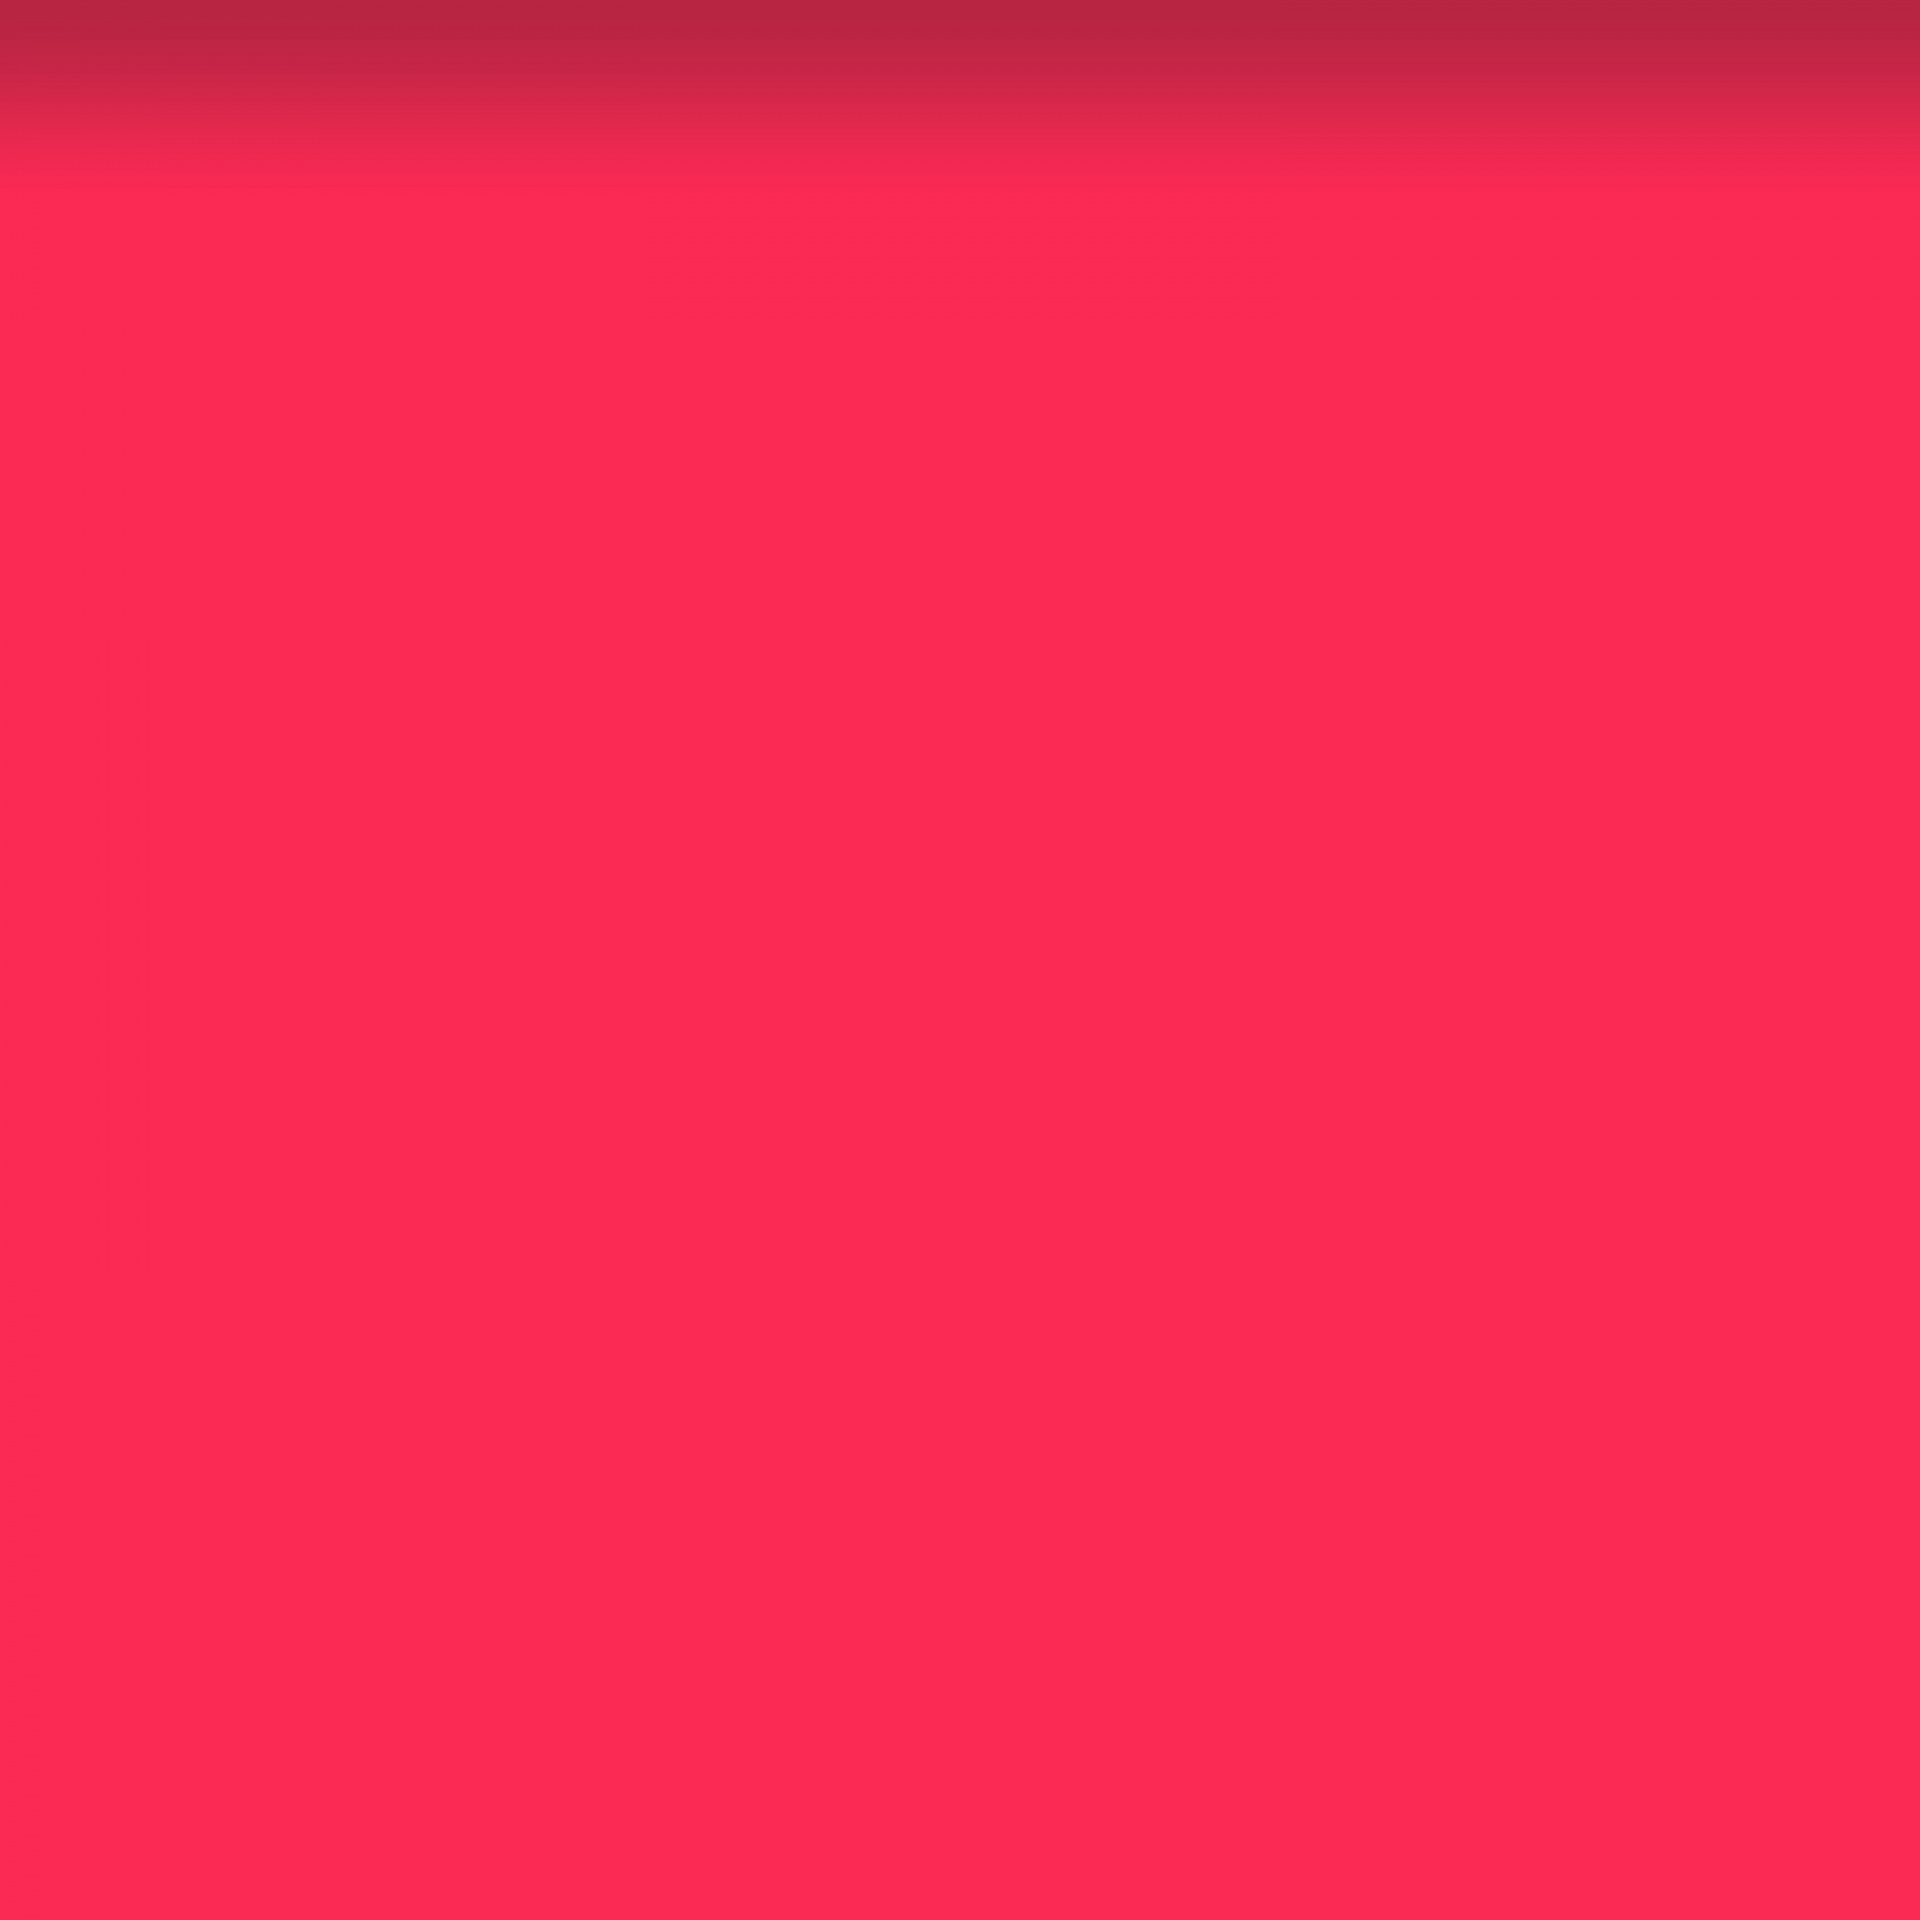 Download free photo of Background,red,pink,color,plain - from 